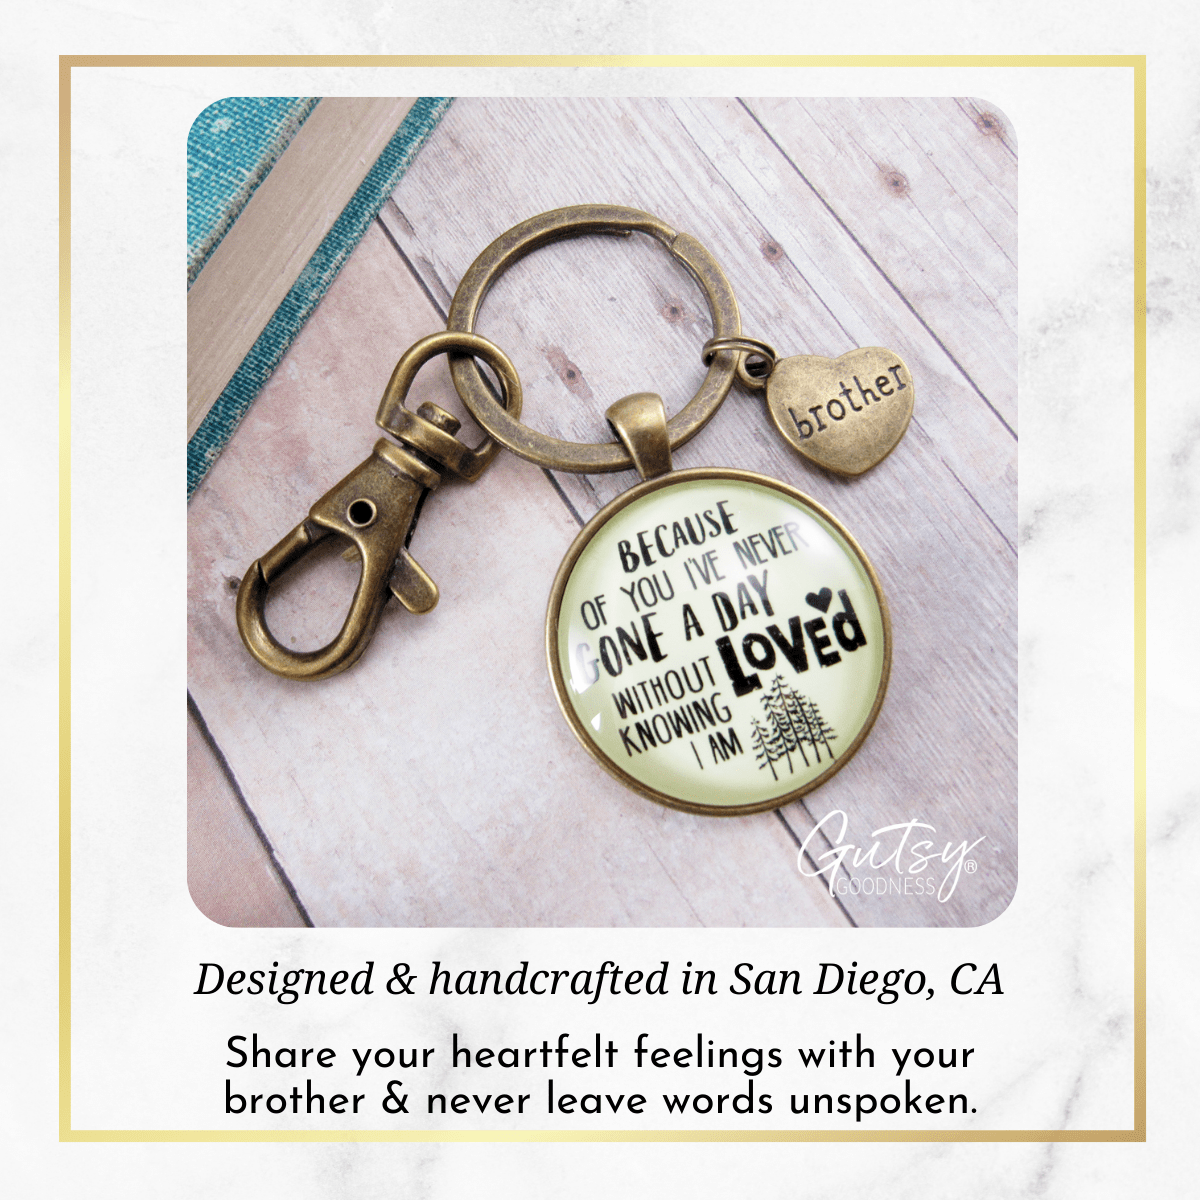 Brother Keychain Because of You Never Gone Without Love Meaningful Gift From Sister - Gutsy Goodness